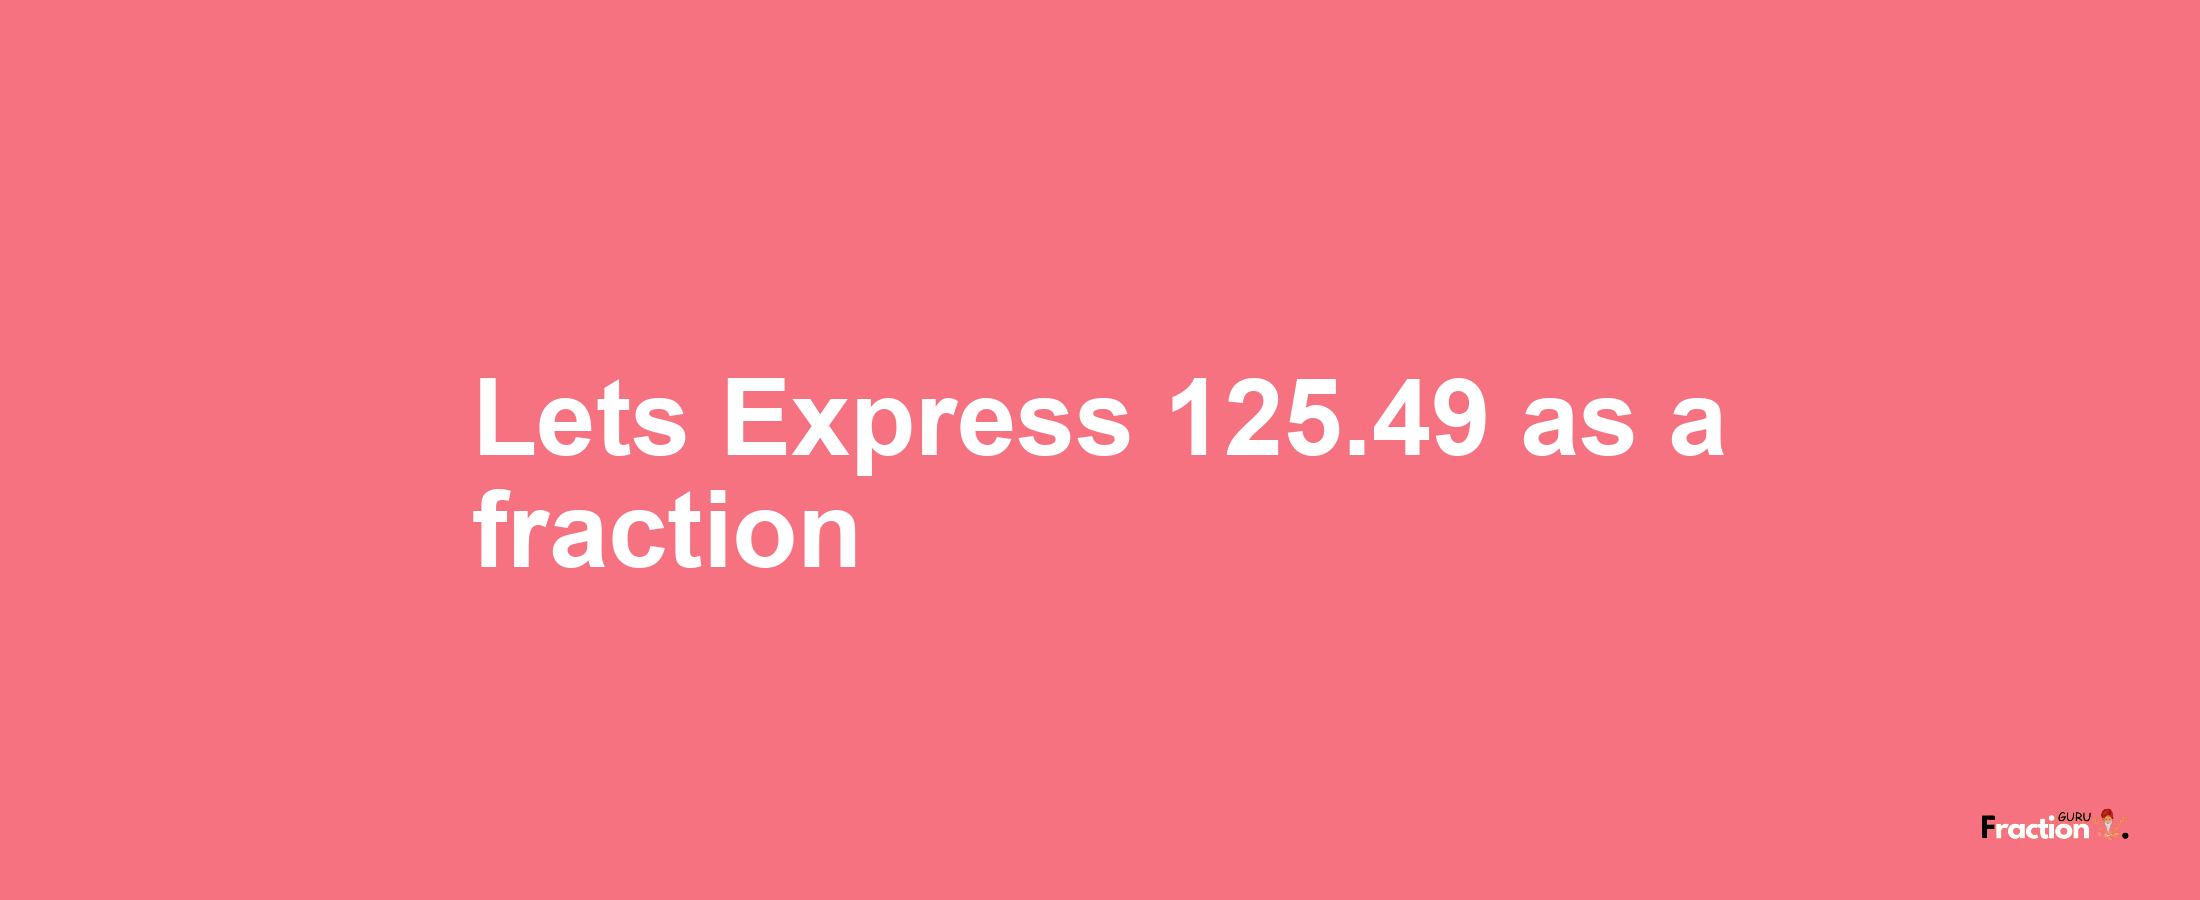 Lets Express 125.49 as afraction